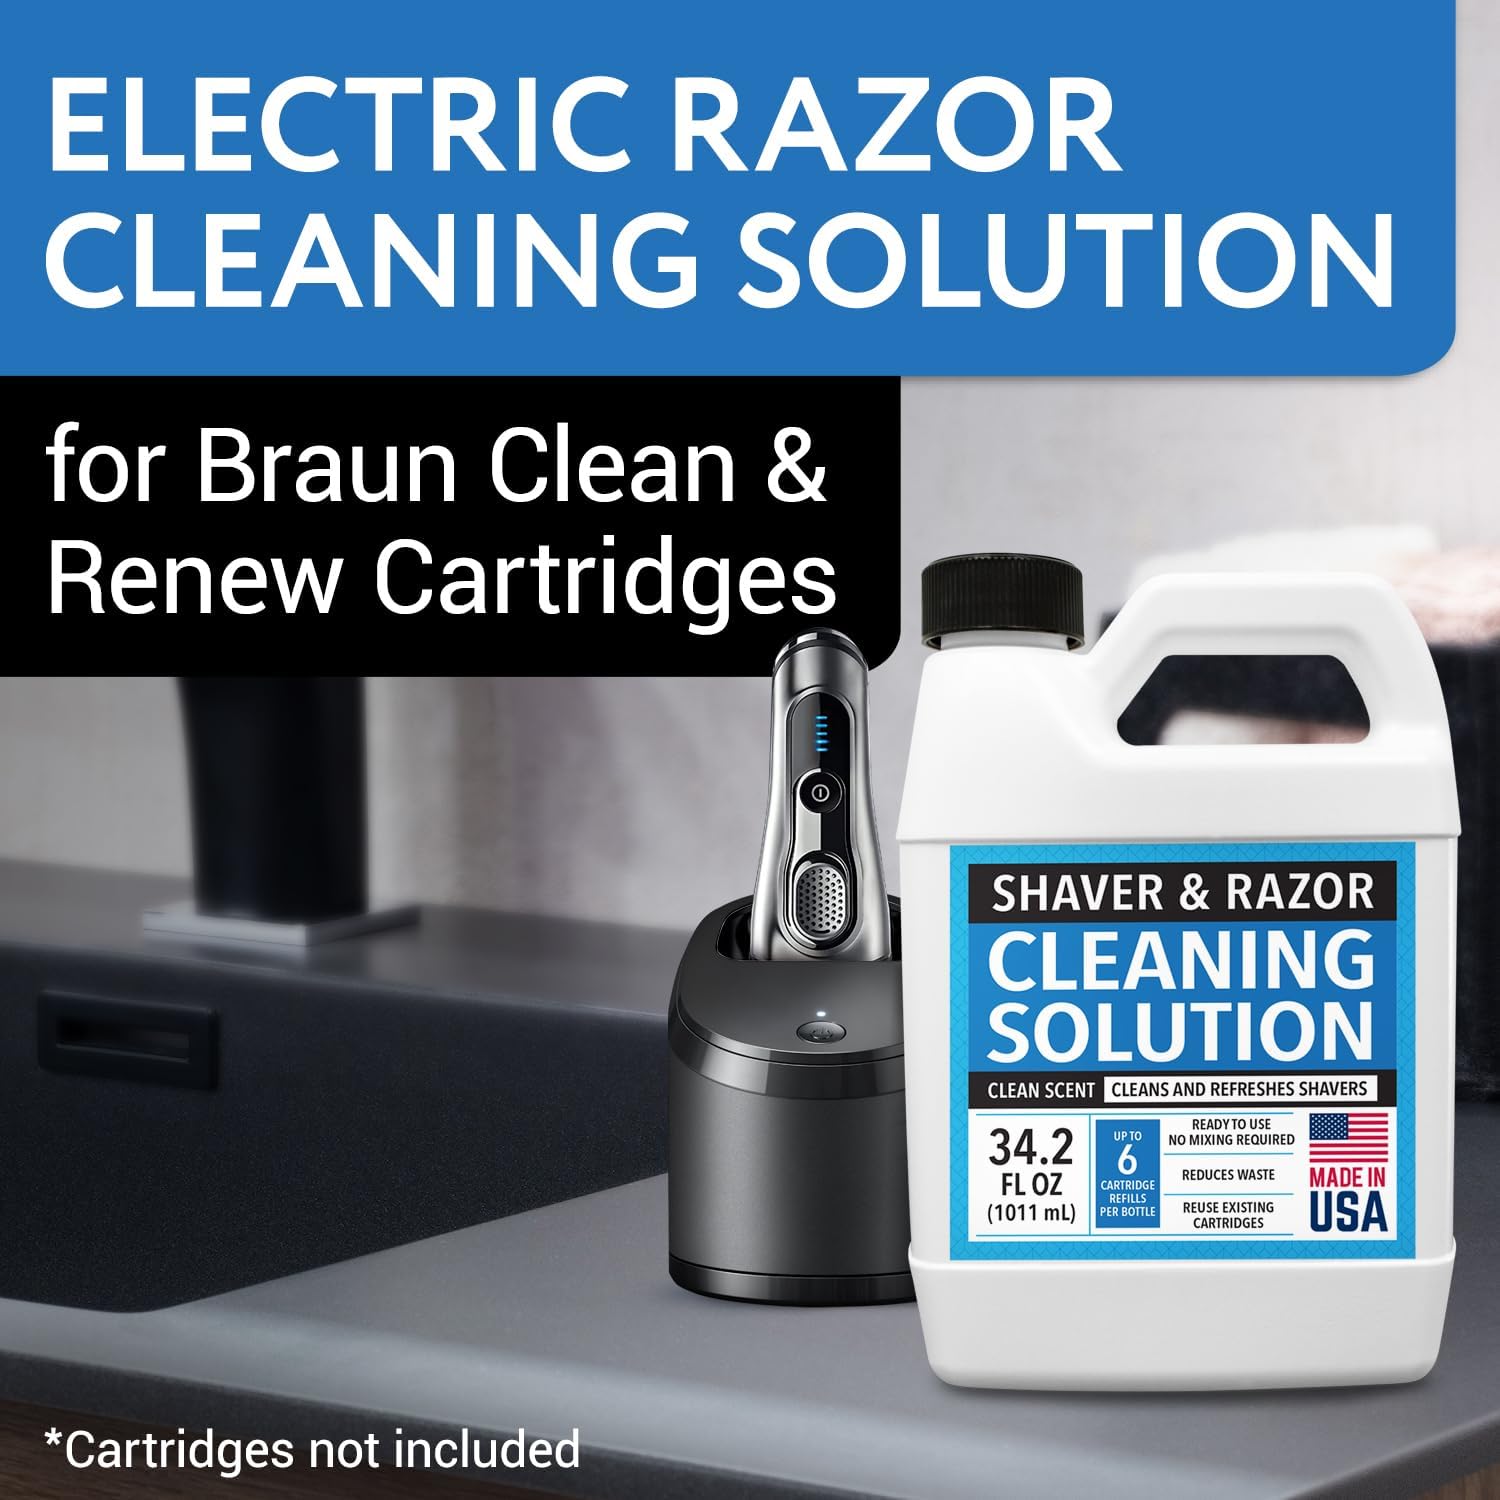 IMPRESA Electric Shaver Cleaning Solution for Braun Clean & Renew